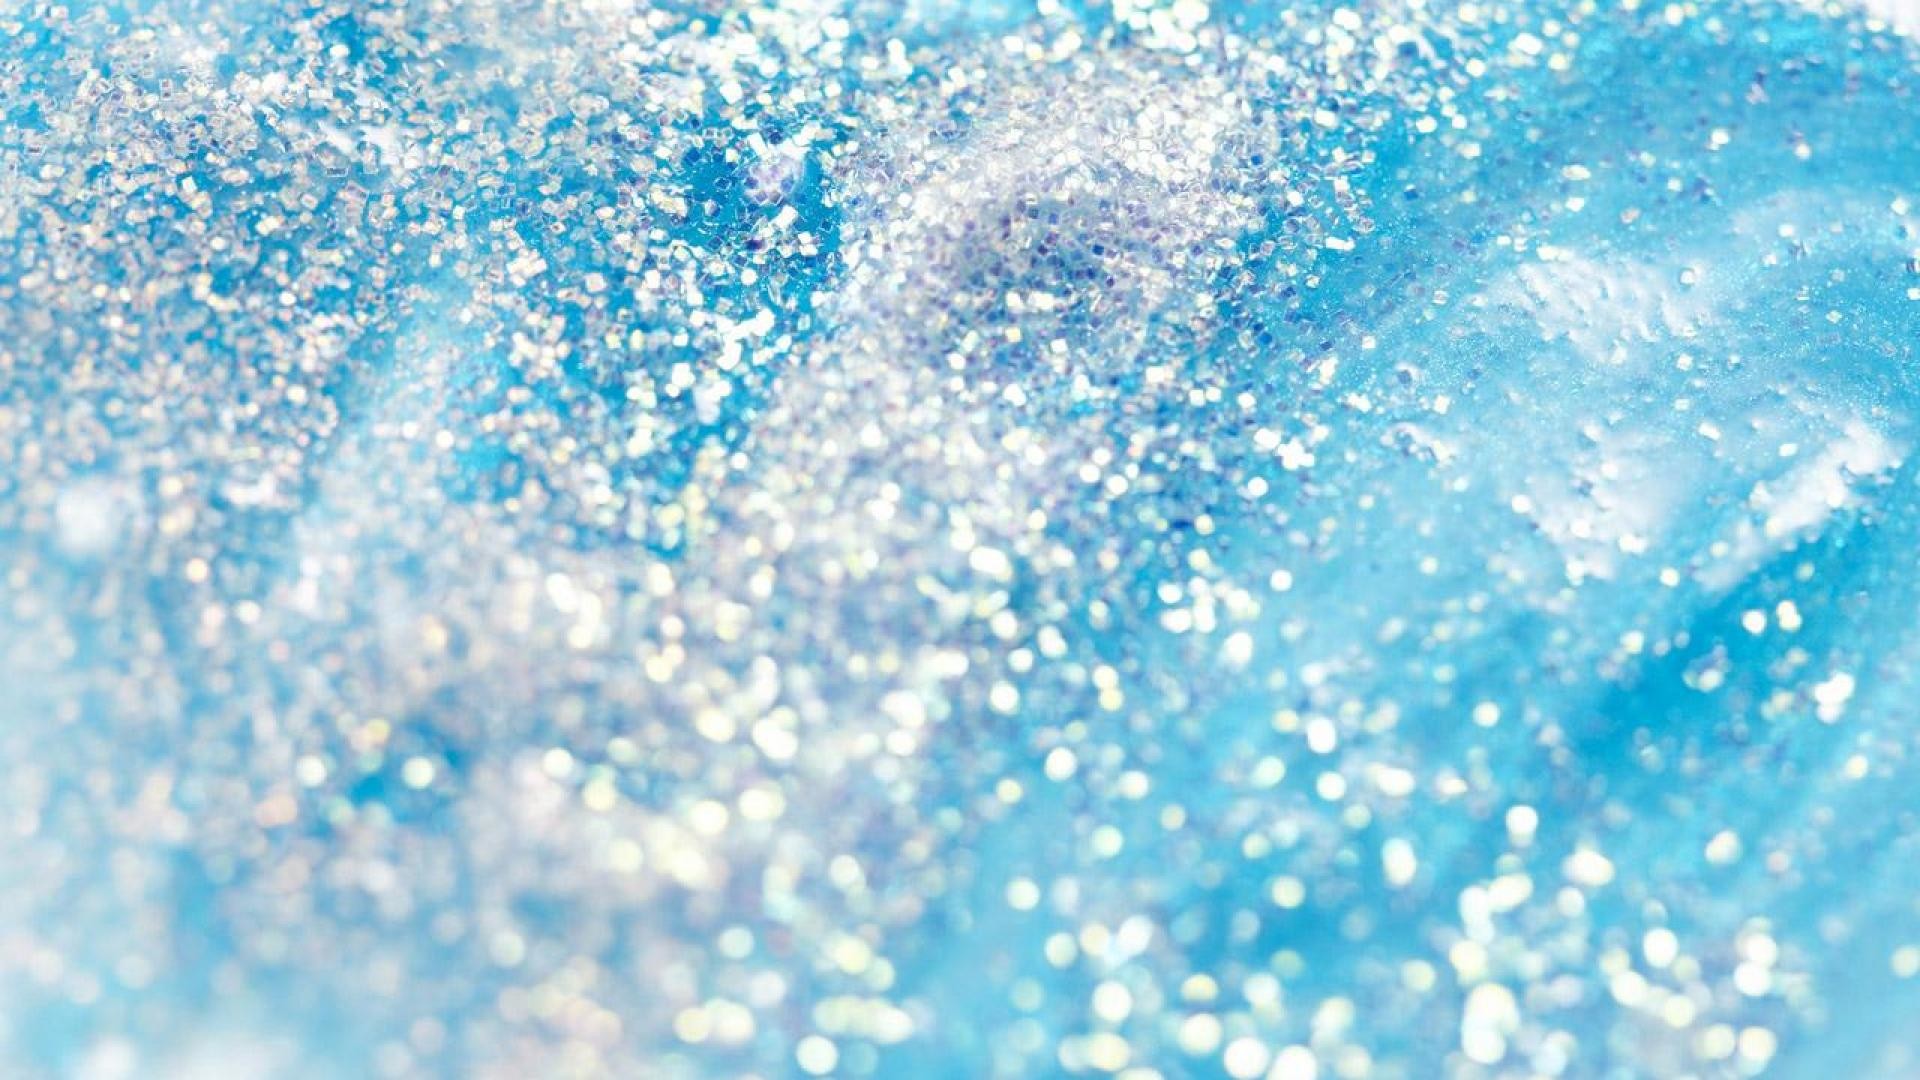 1920x1080 Free Download Glitter Backgrounds.